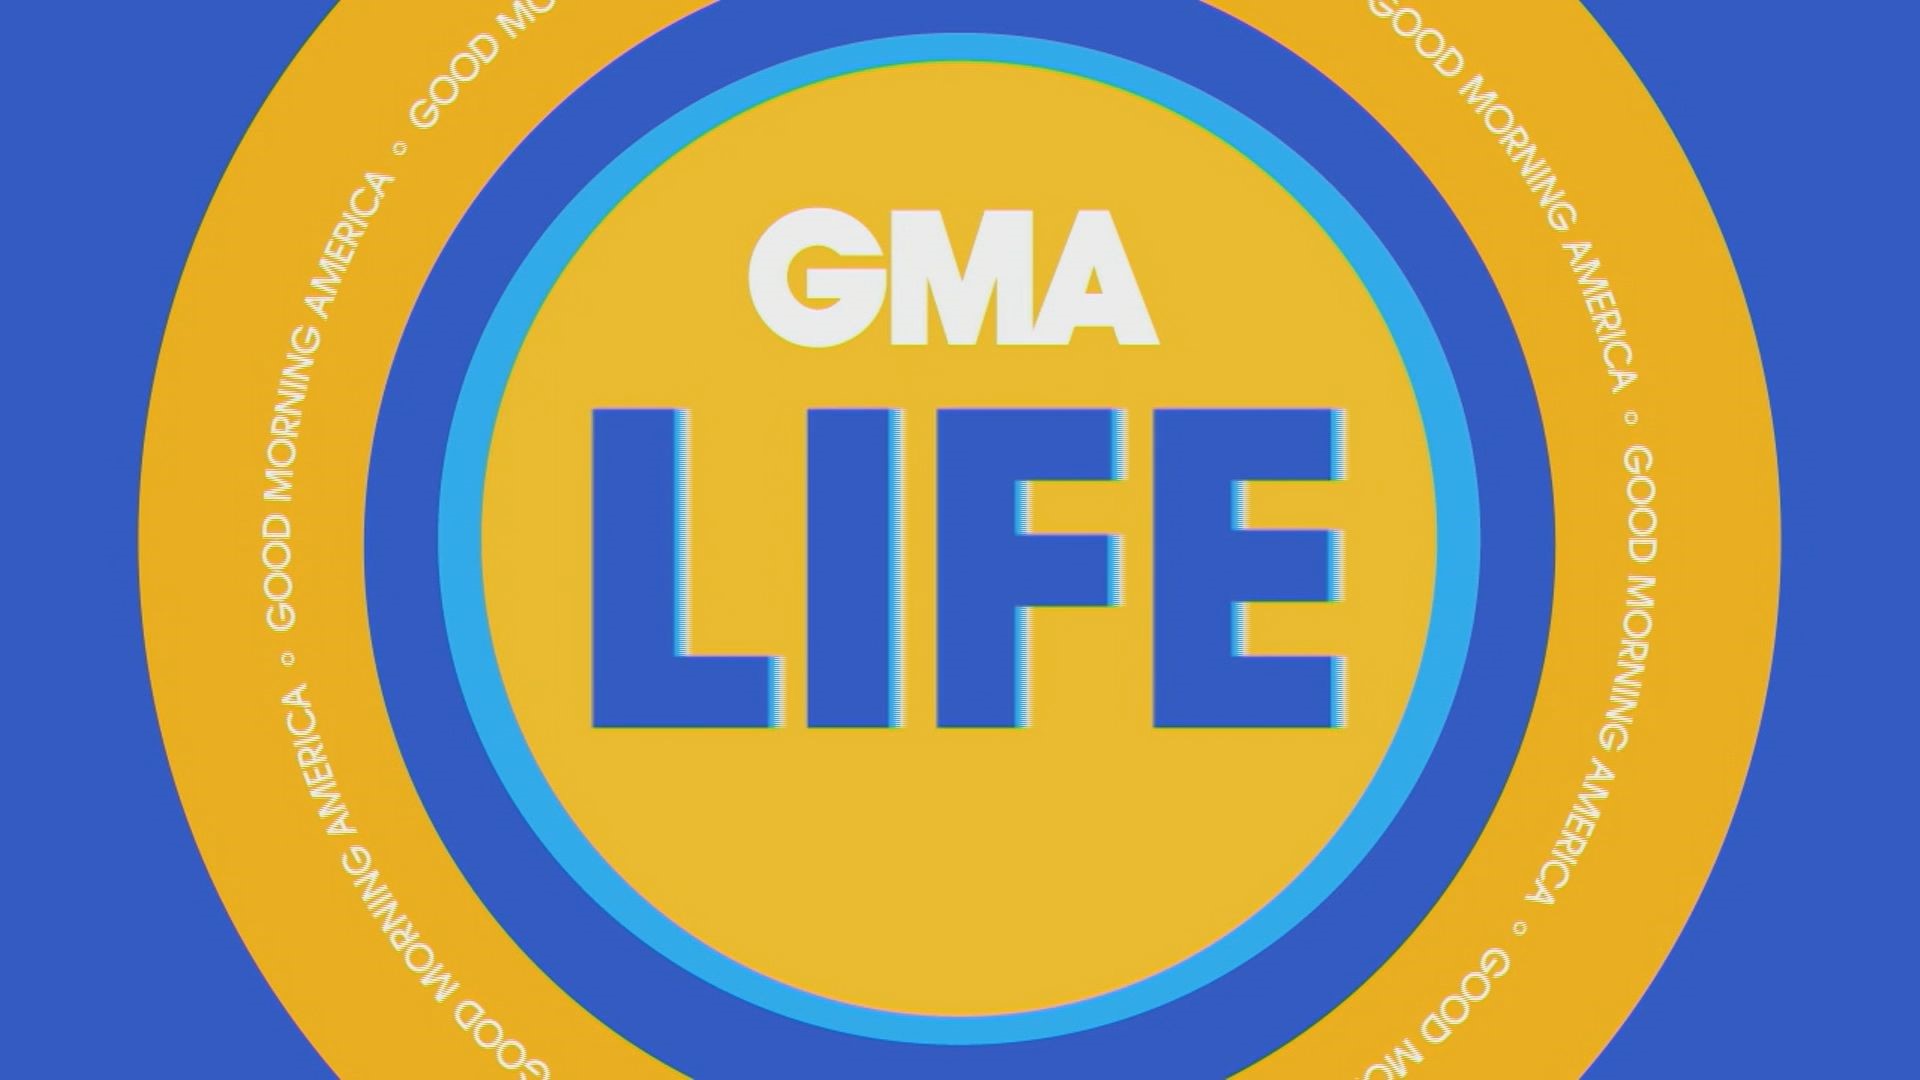 This week on GMA Life: level up your lunchbox and land big deals on flights. Plus, visit Steelers training camp & play ask me anything with Carly Rae Jepson.